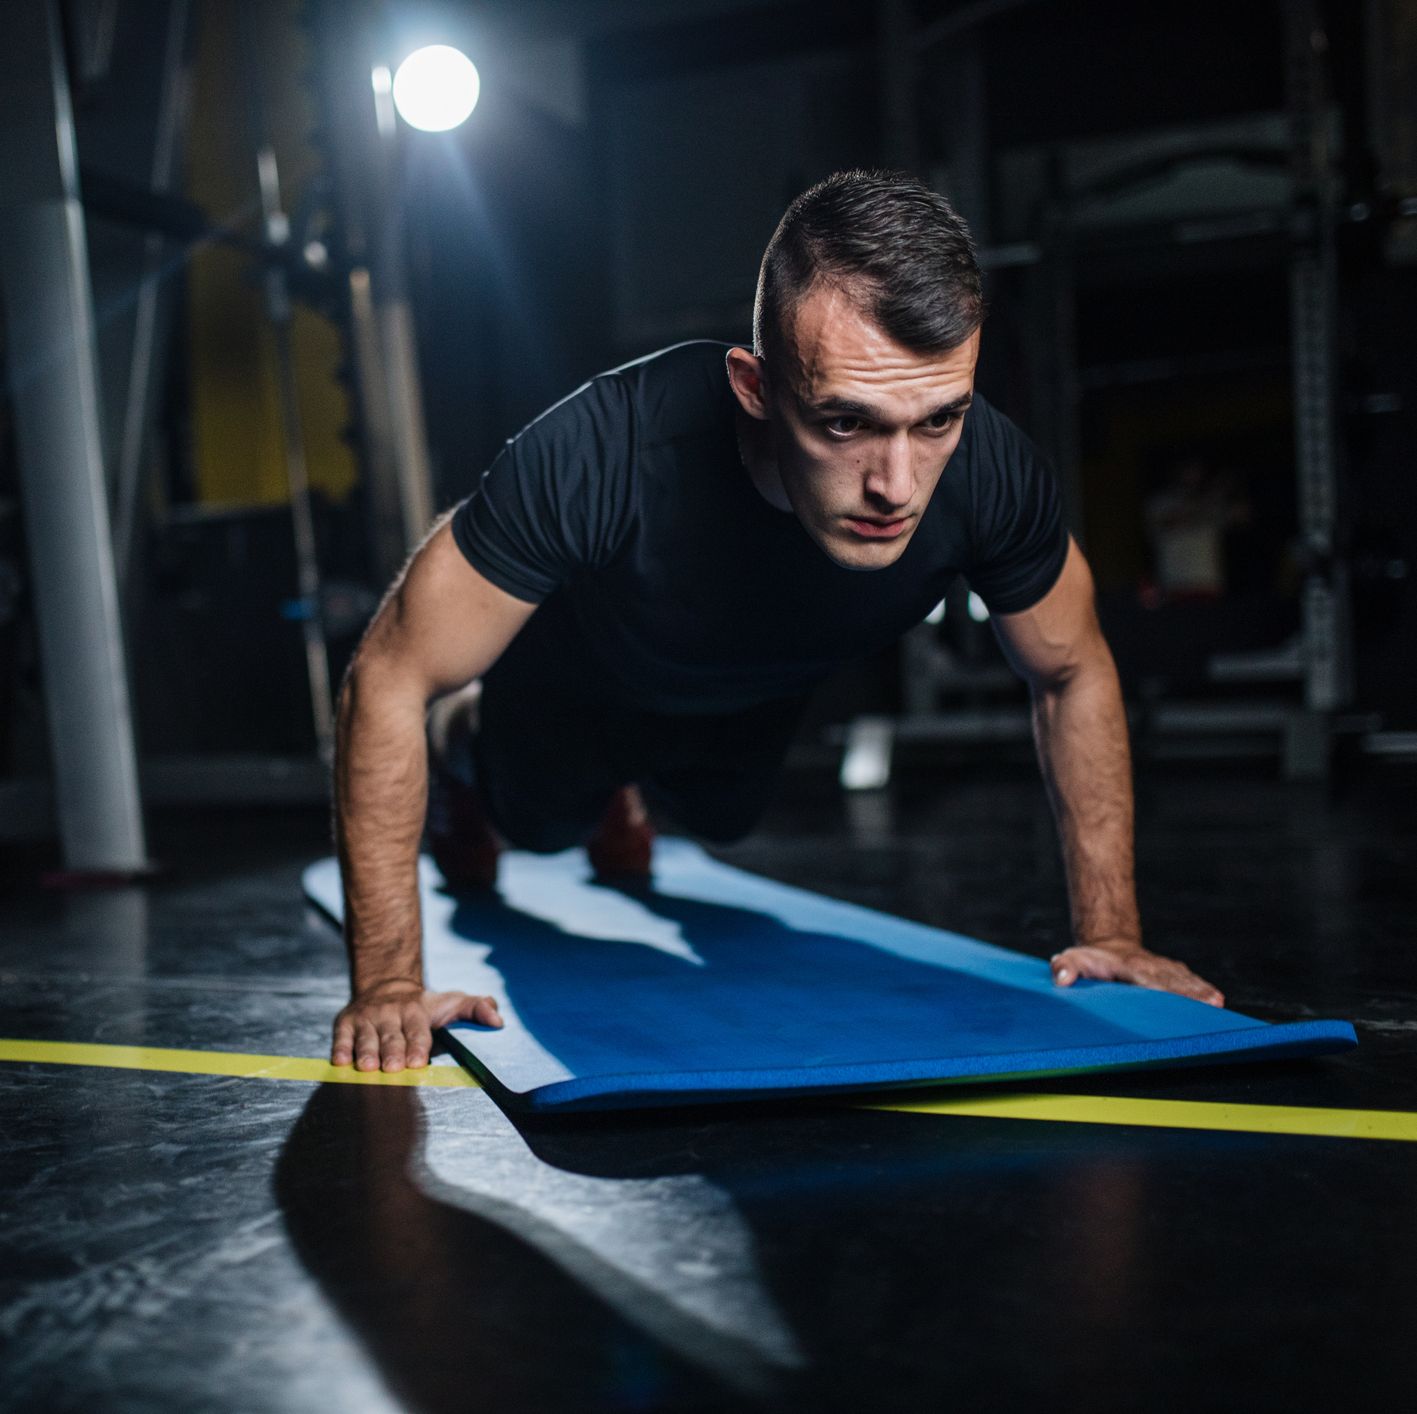 How to Make the Most of a 5-Minute Workout